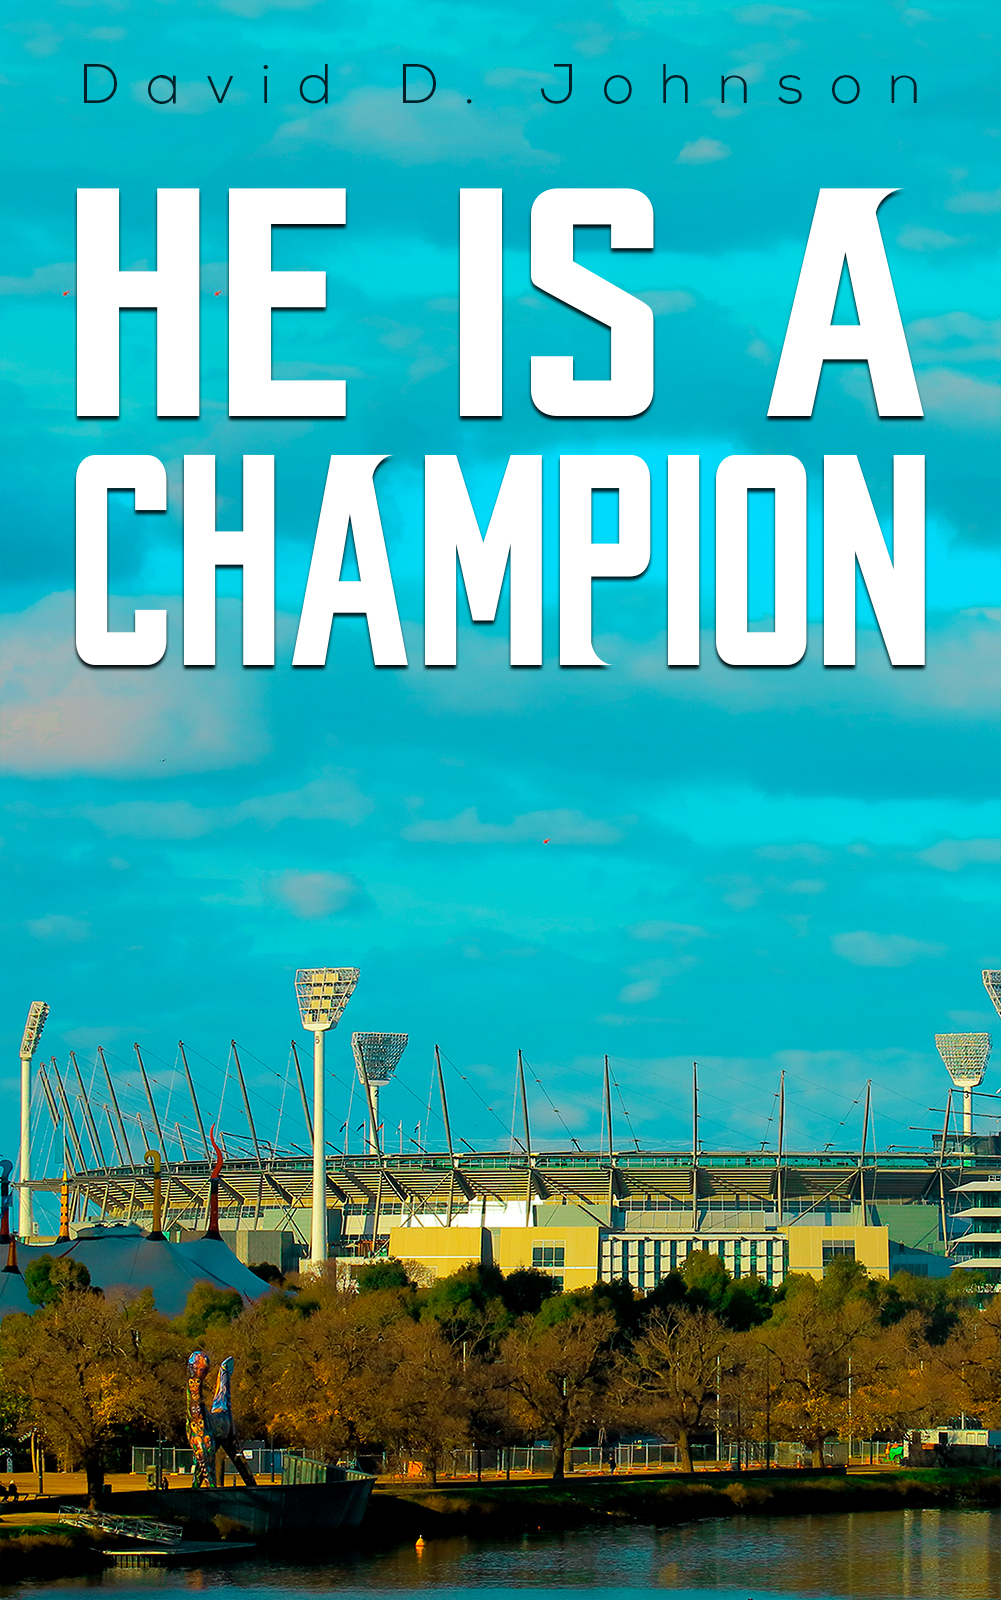 This image is the cover for the book He Is a Champion